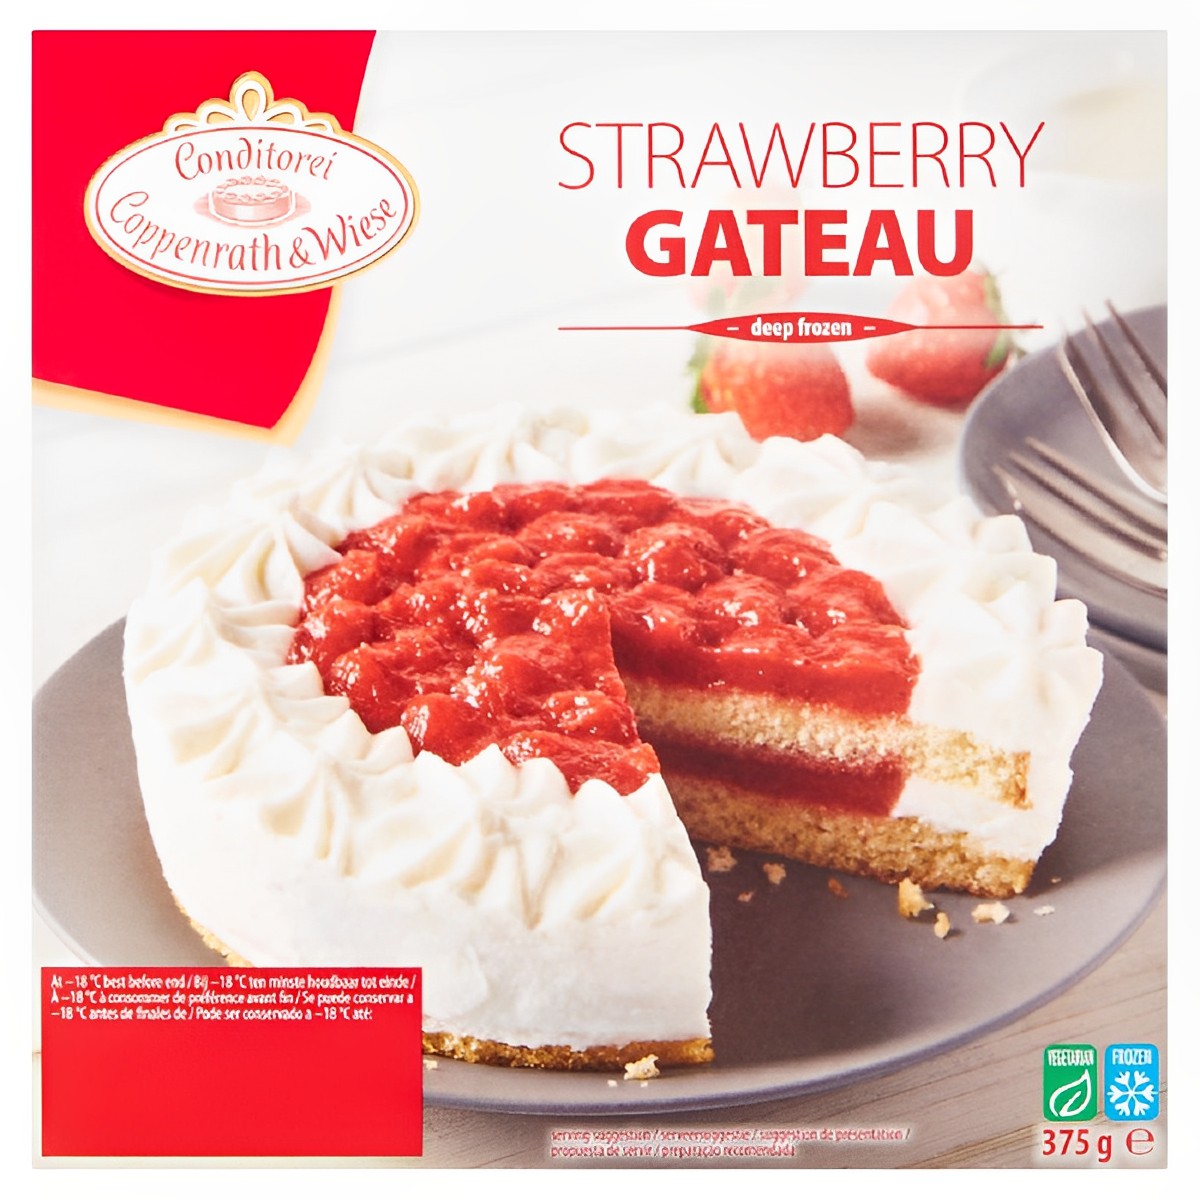 Conditorei Coppenrath & Wiese -  Strawberry Gateau - 375g - Continental Food Store